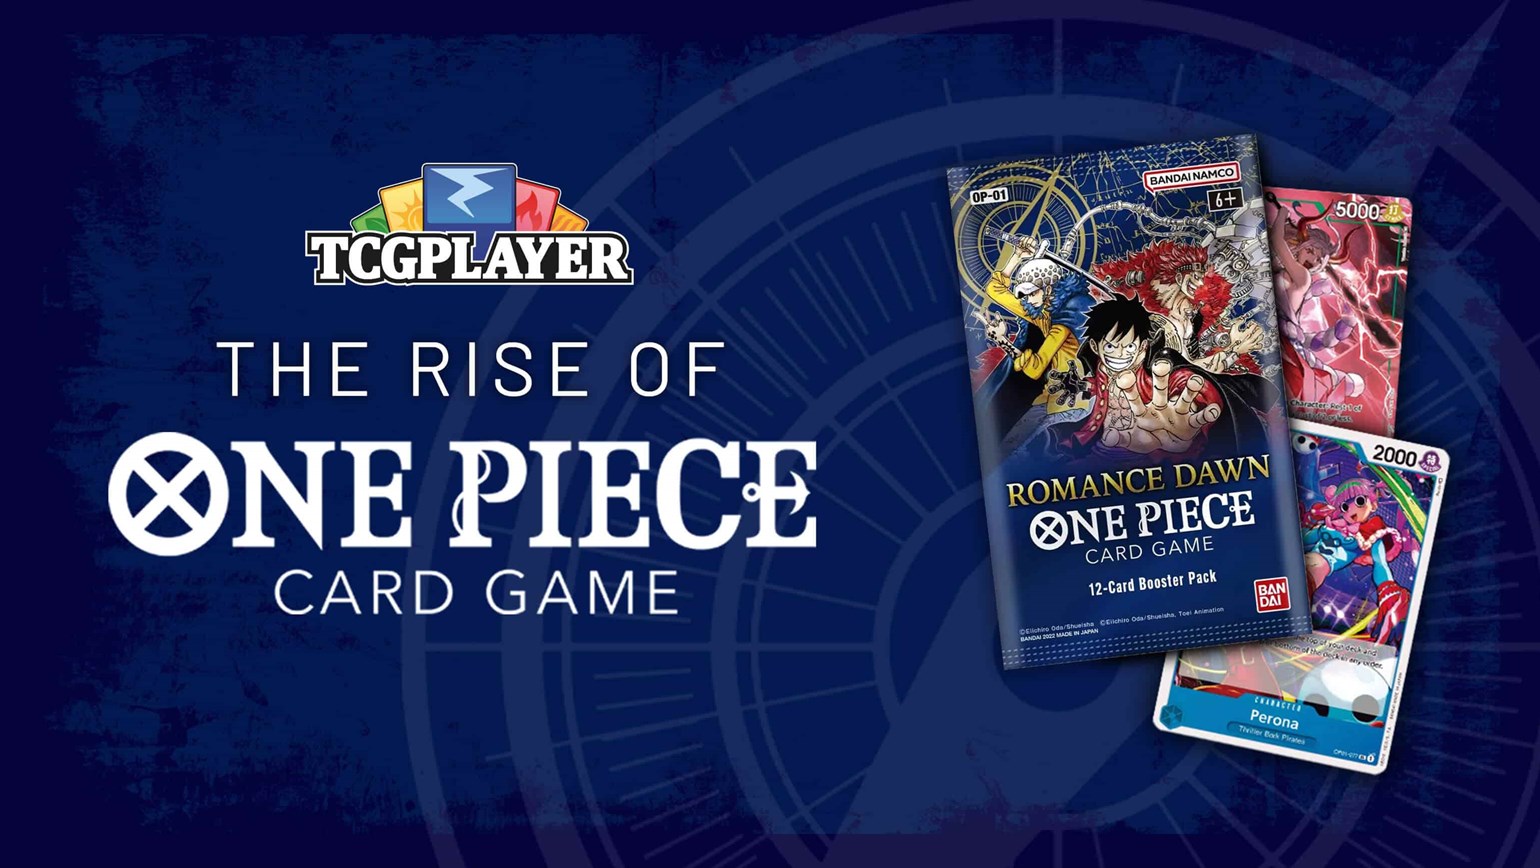 The Rise of One Piece Card Game